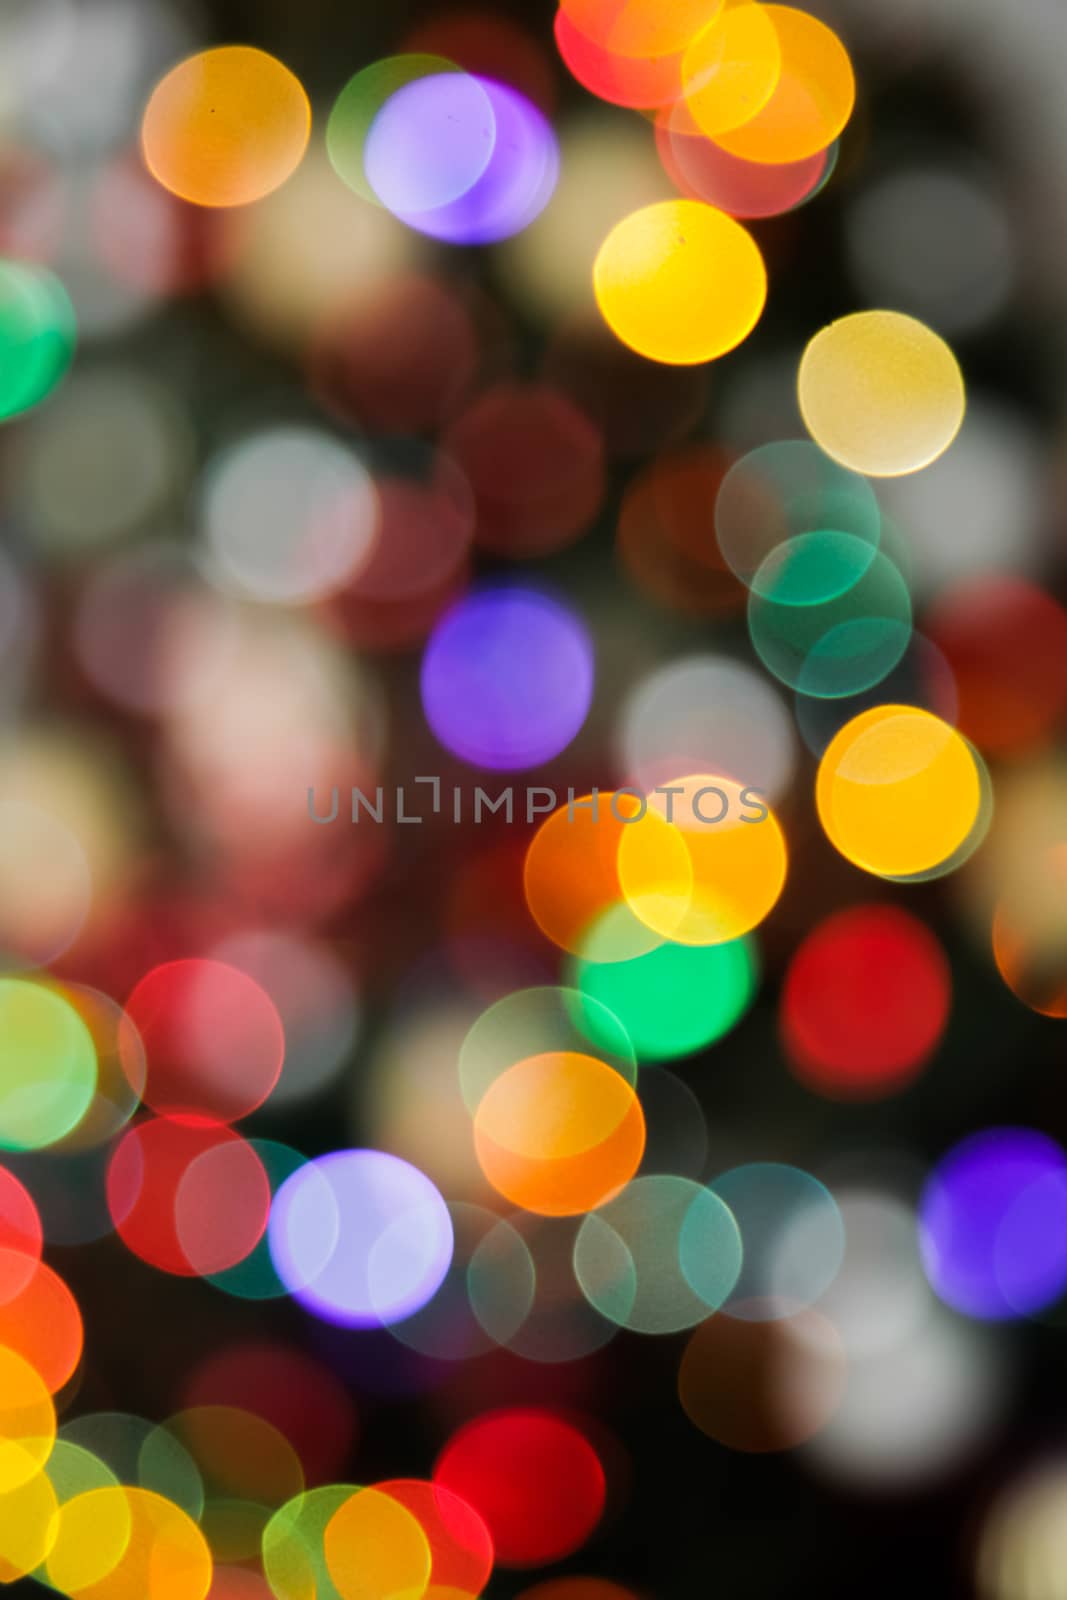 As simple as a beautiful Blurry Xmas Light by aetb